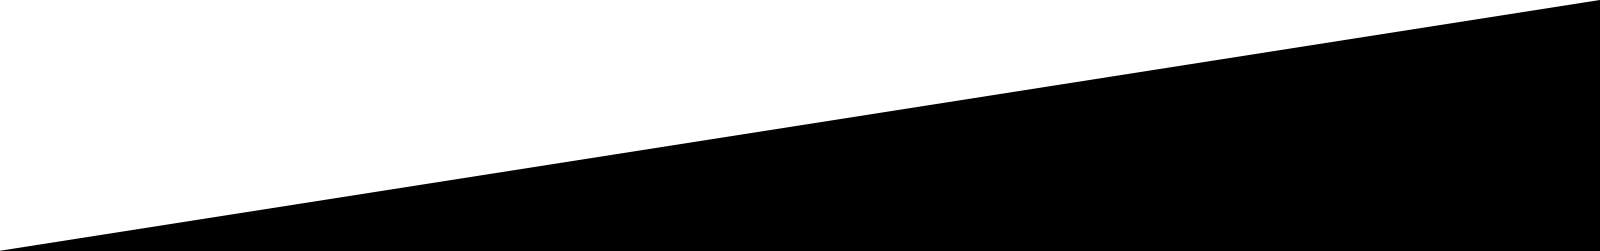 Diagonal line between white area and black area for design purpose